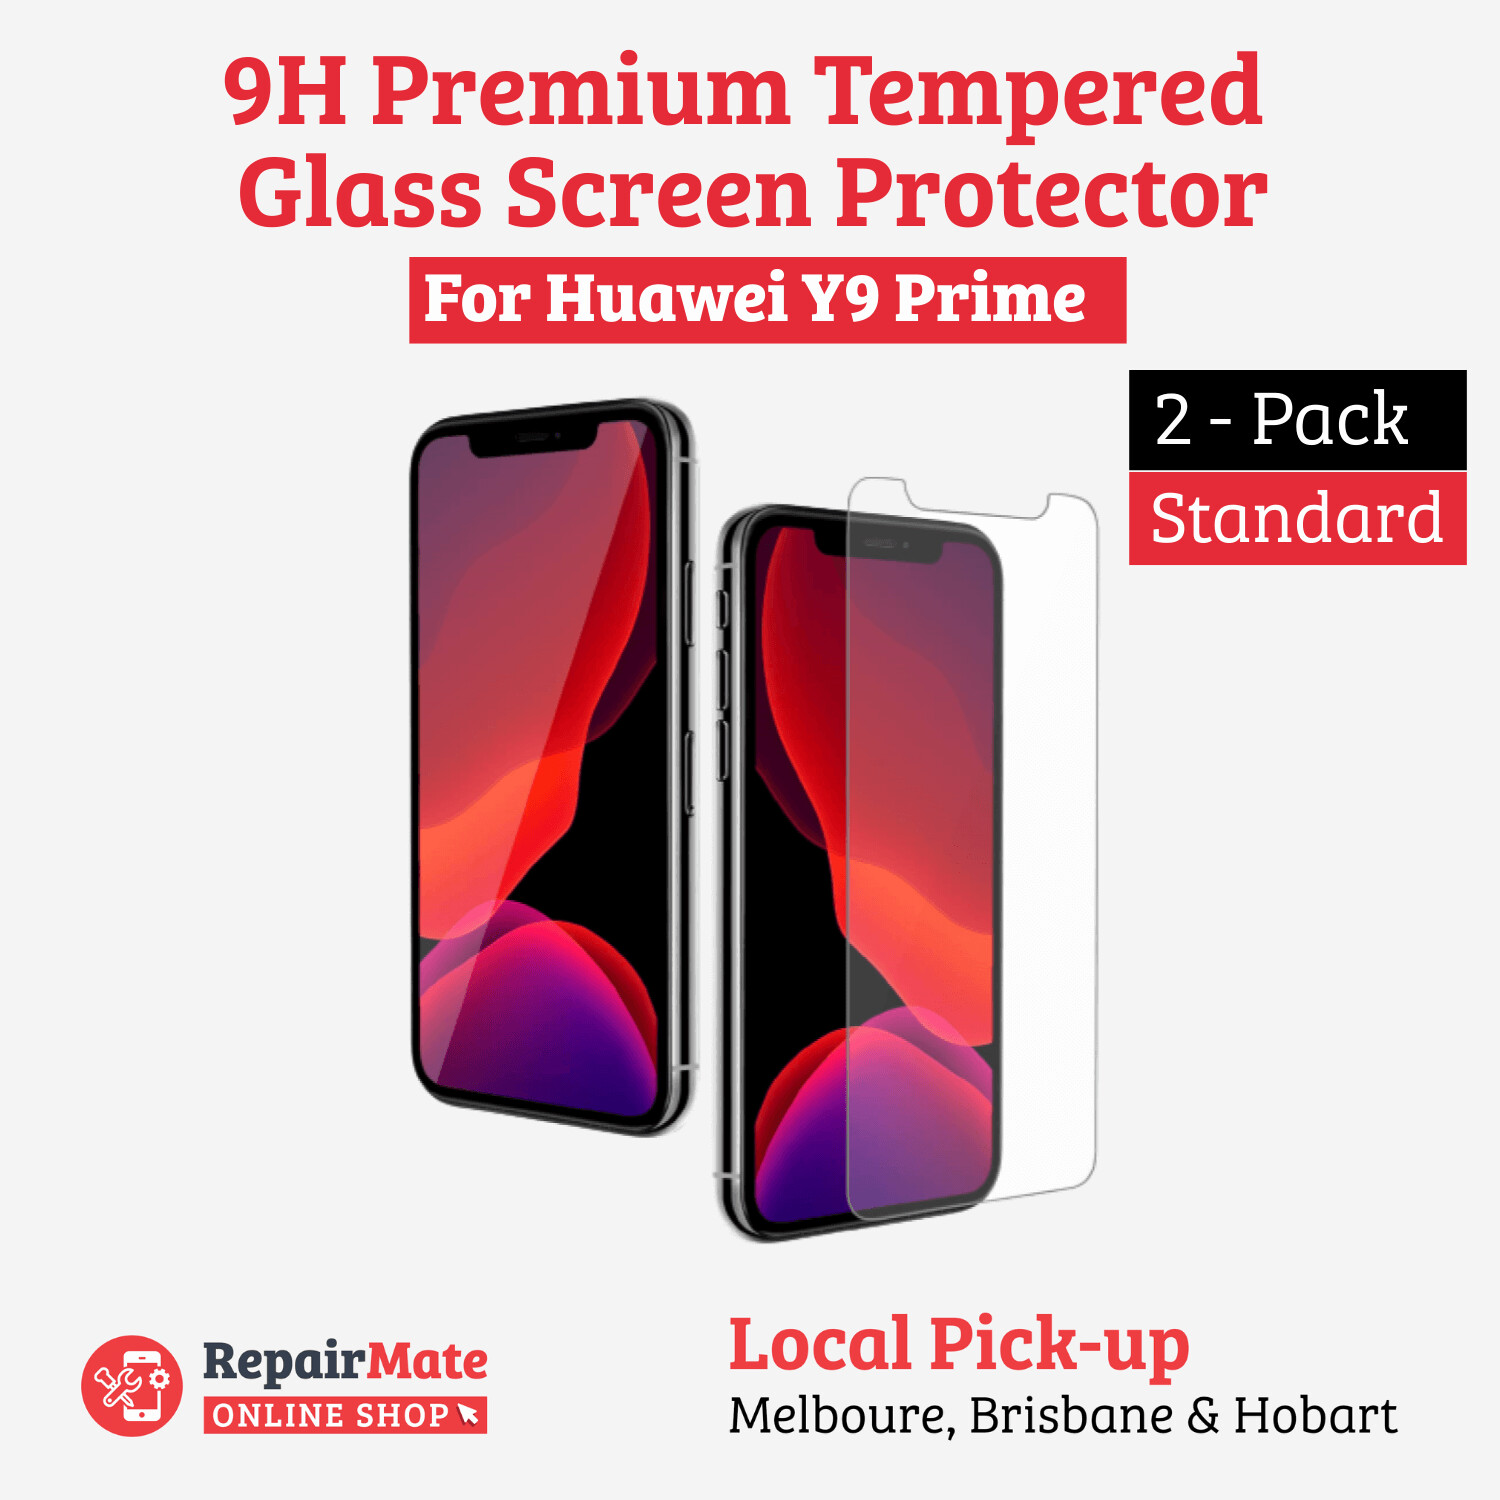 Huawei Y9 Prime (2019) 9H Premium Tempered Glass Screen Protector [2 Pack]